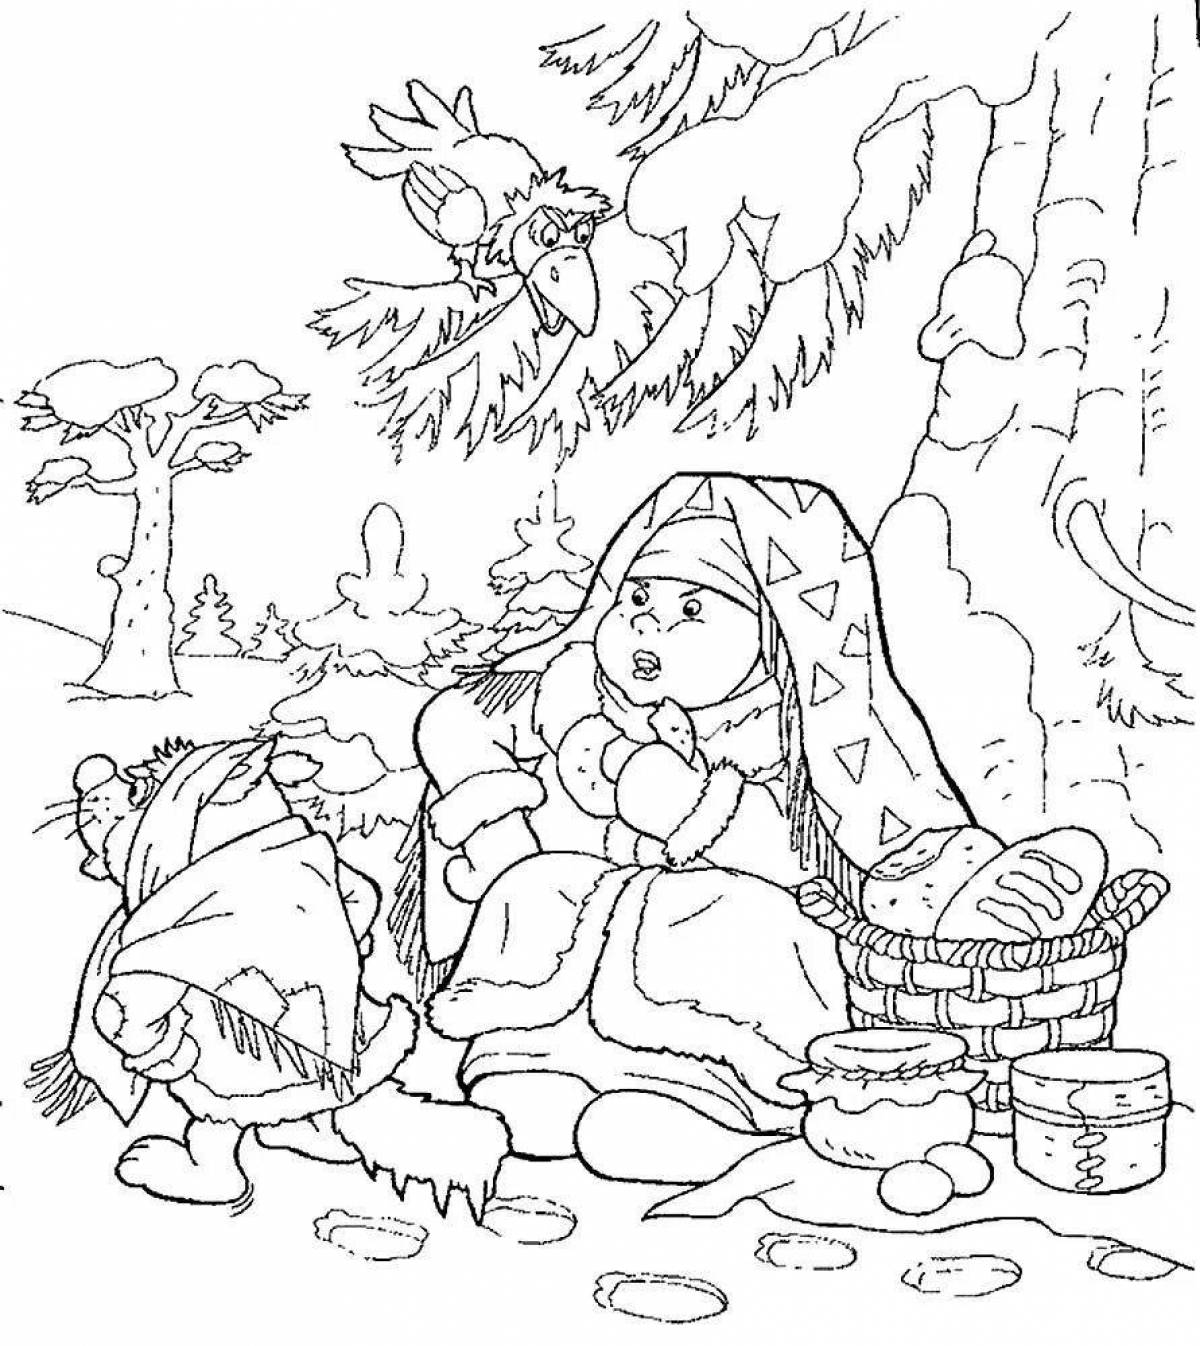 Exquisite coloring book for the fairy tale frost